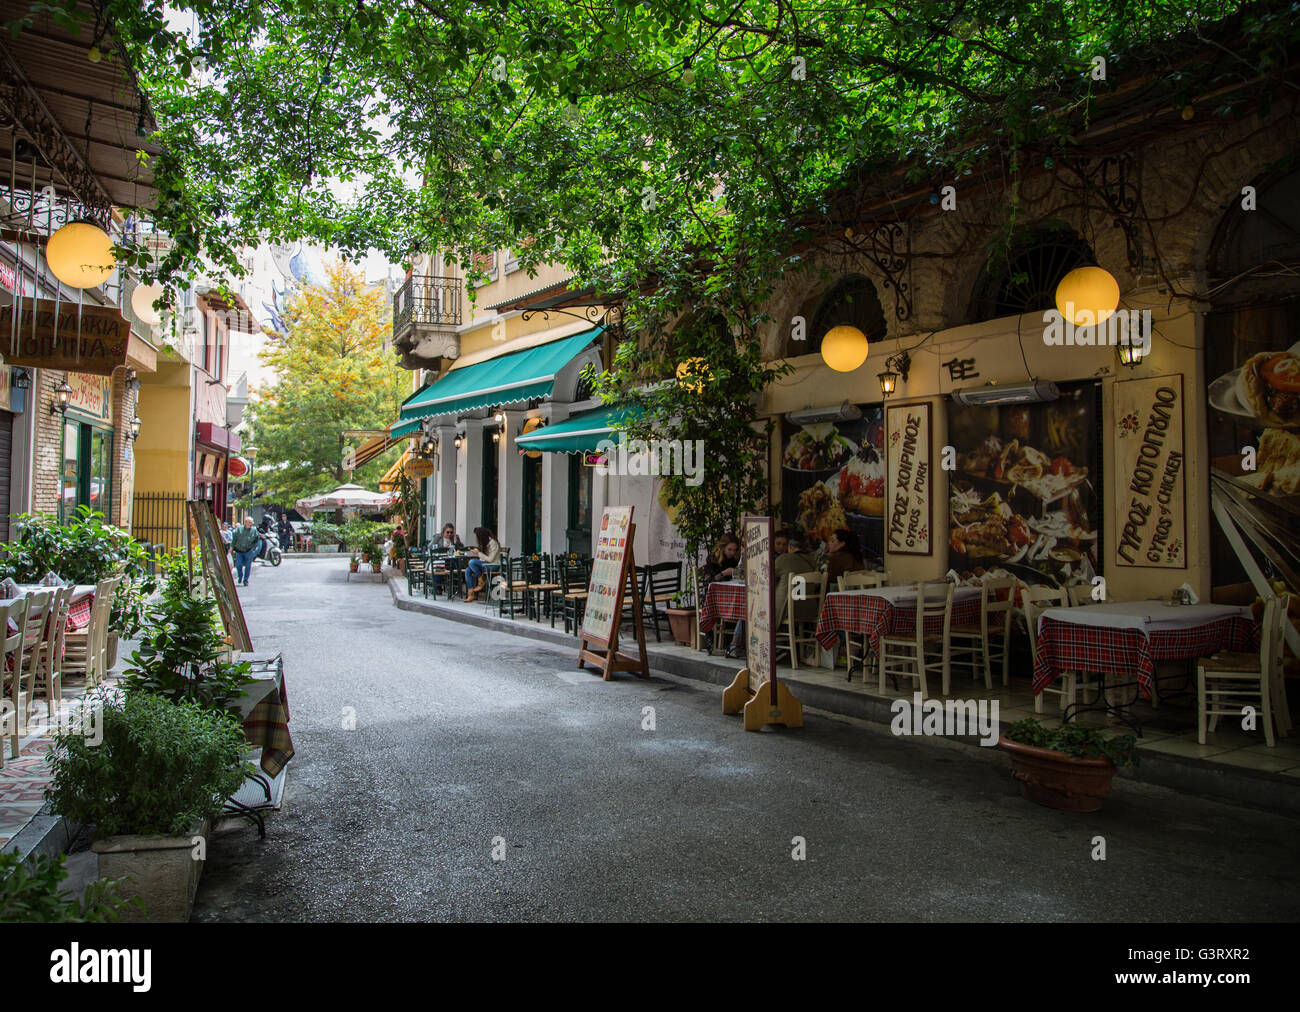 Passing tavernas and restaurants, while walking through the streets of the historic neighborhood of Plaka in Athens, Greece. Stock Photo